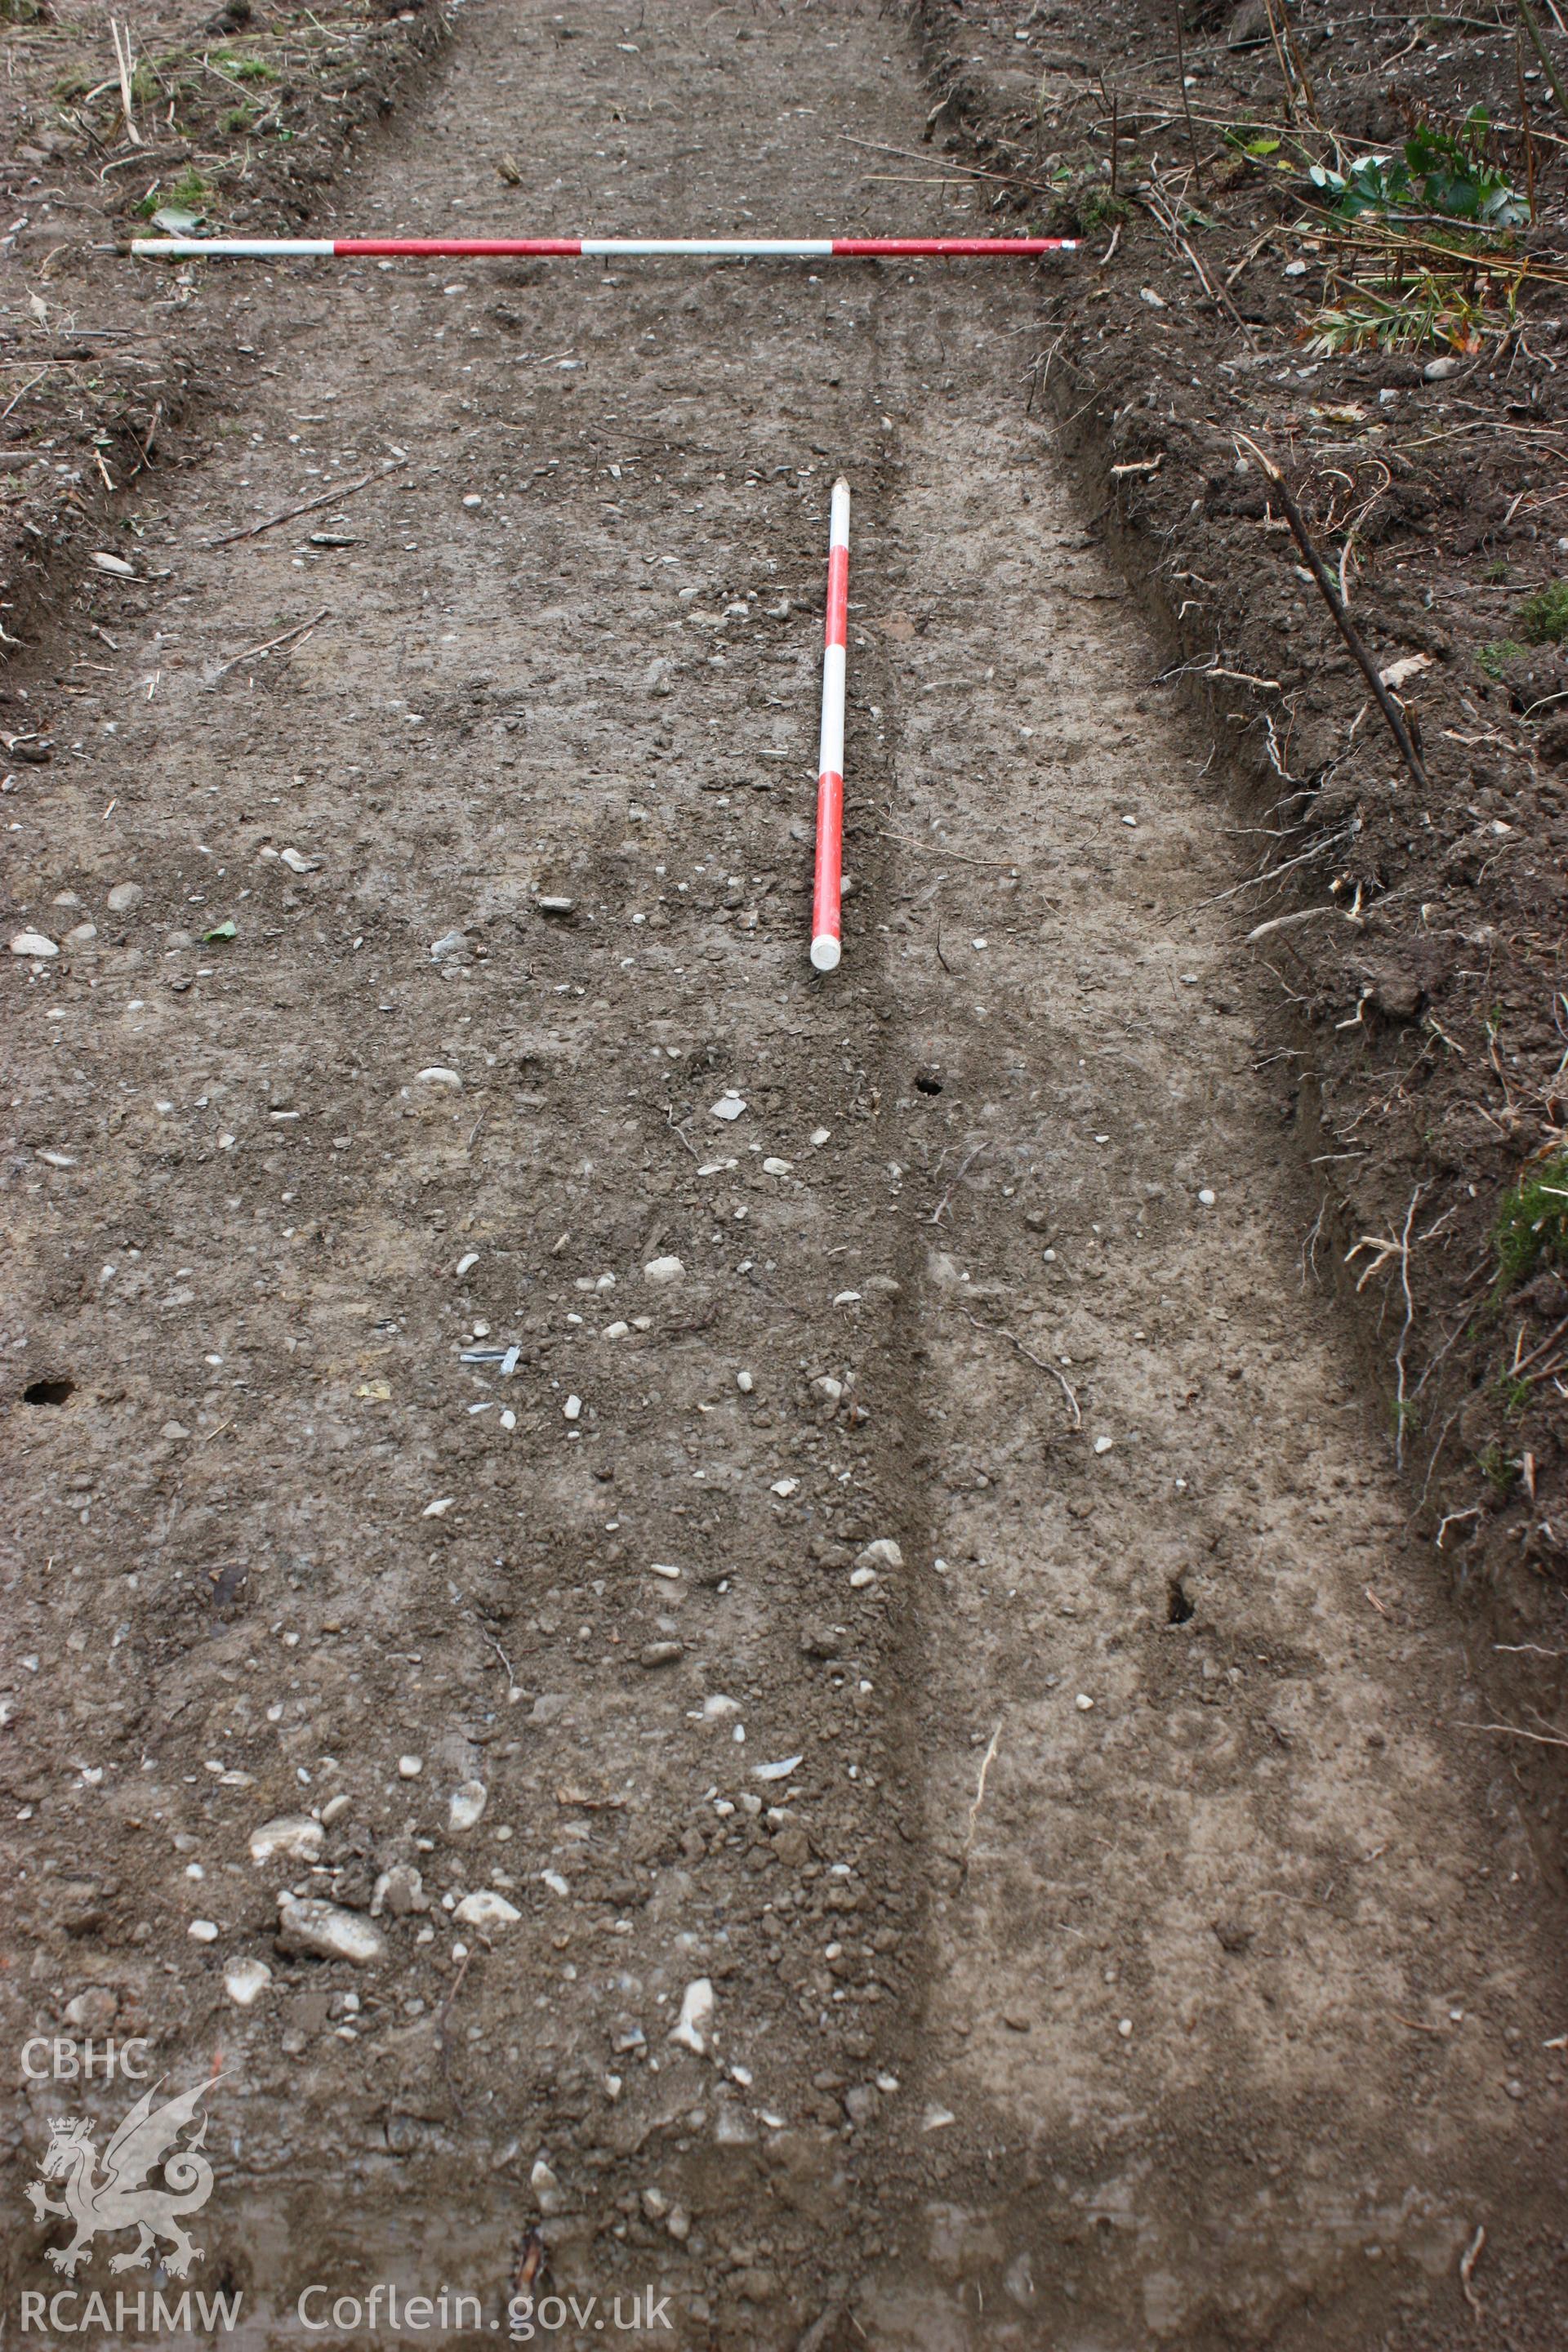 Digital photograph showing road slump deposit (002) with road [001] to NE (top) - part of archaeological field evaluation at Trawscoed Mansion, Trawscoed, produced by Cambrian Archaeological Projects Ltd.